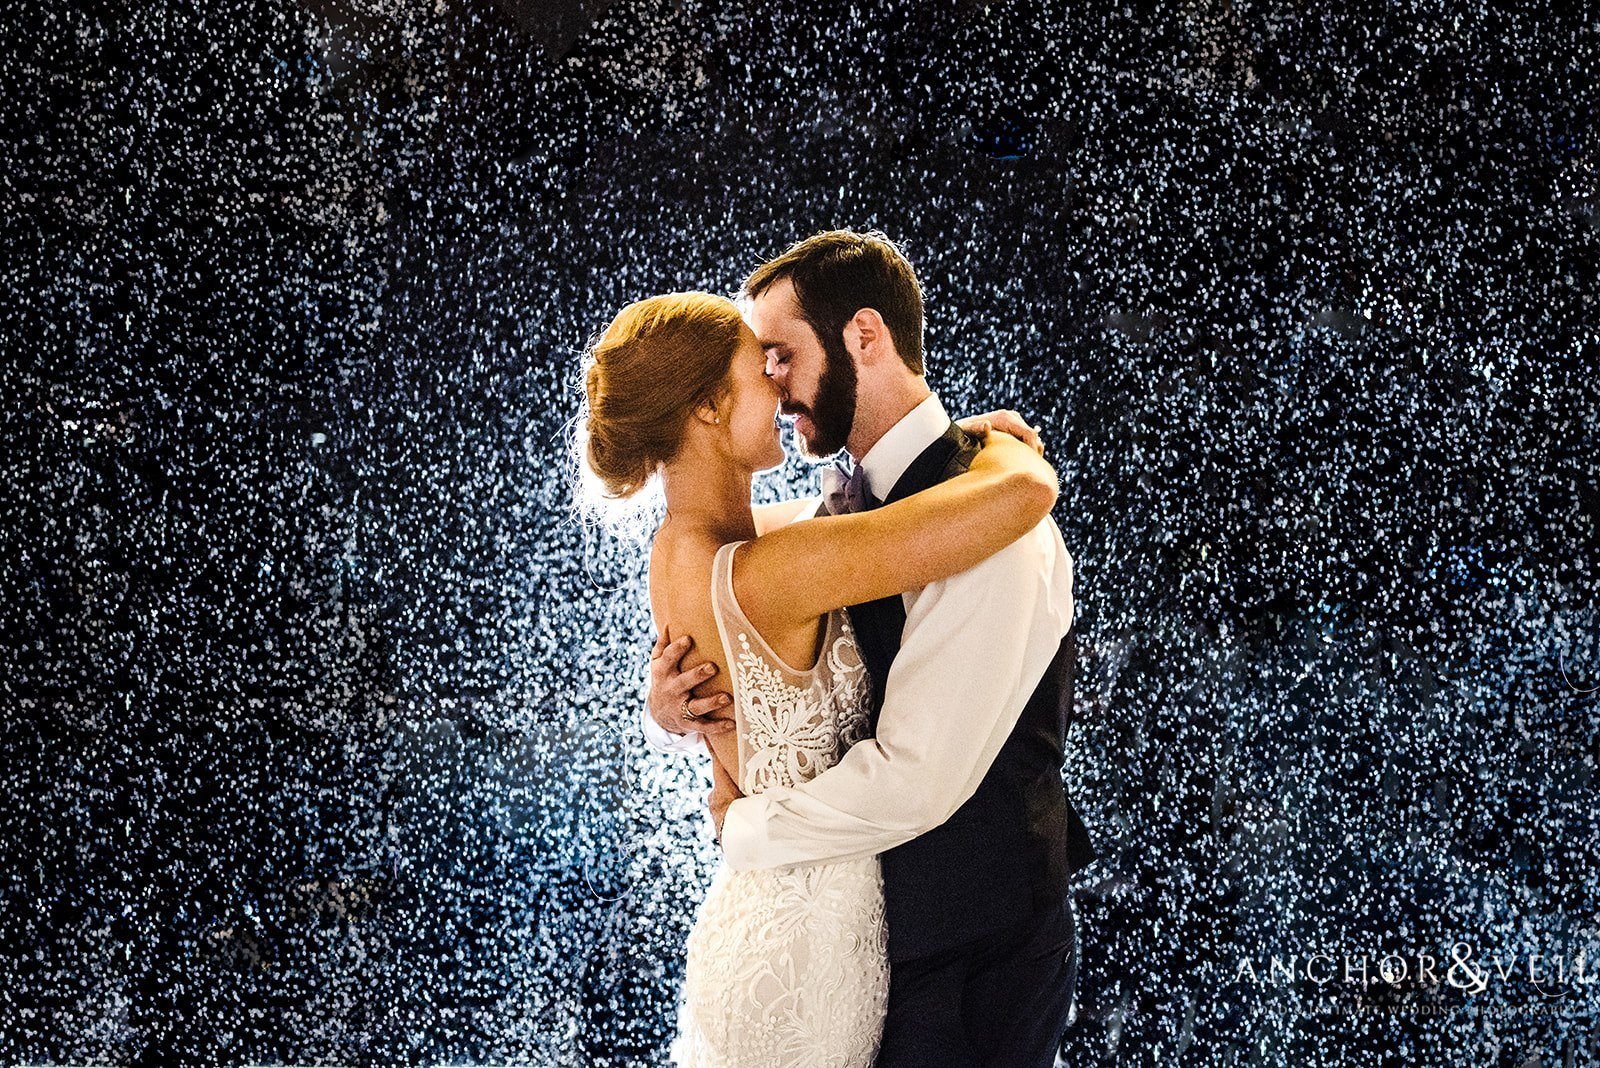 The couple kissing in the rain at the Beech Mountain Ski Resort Wedding